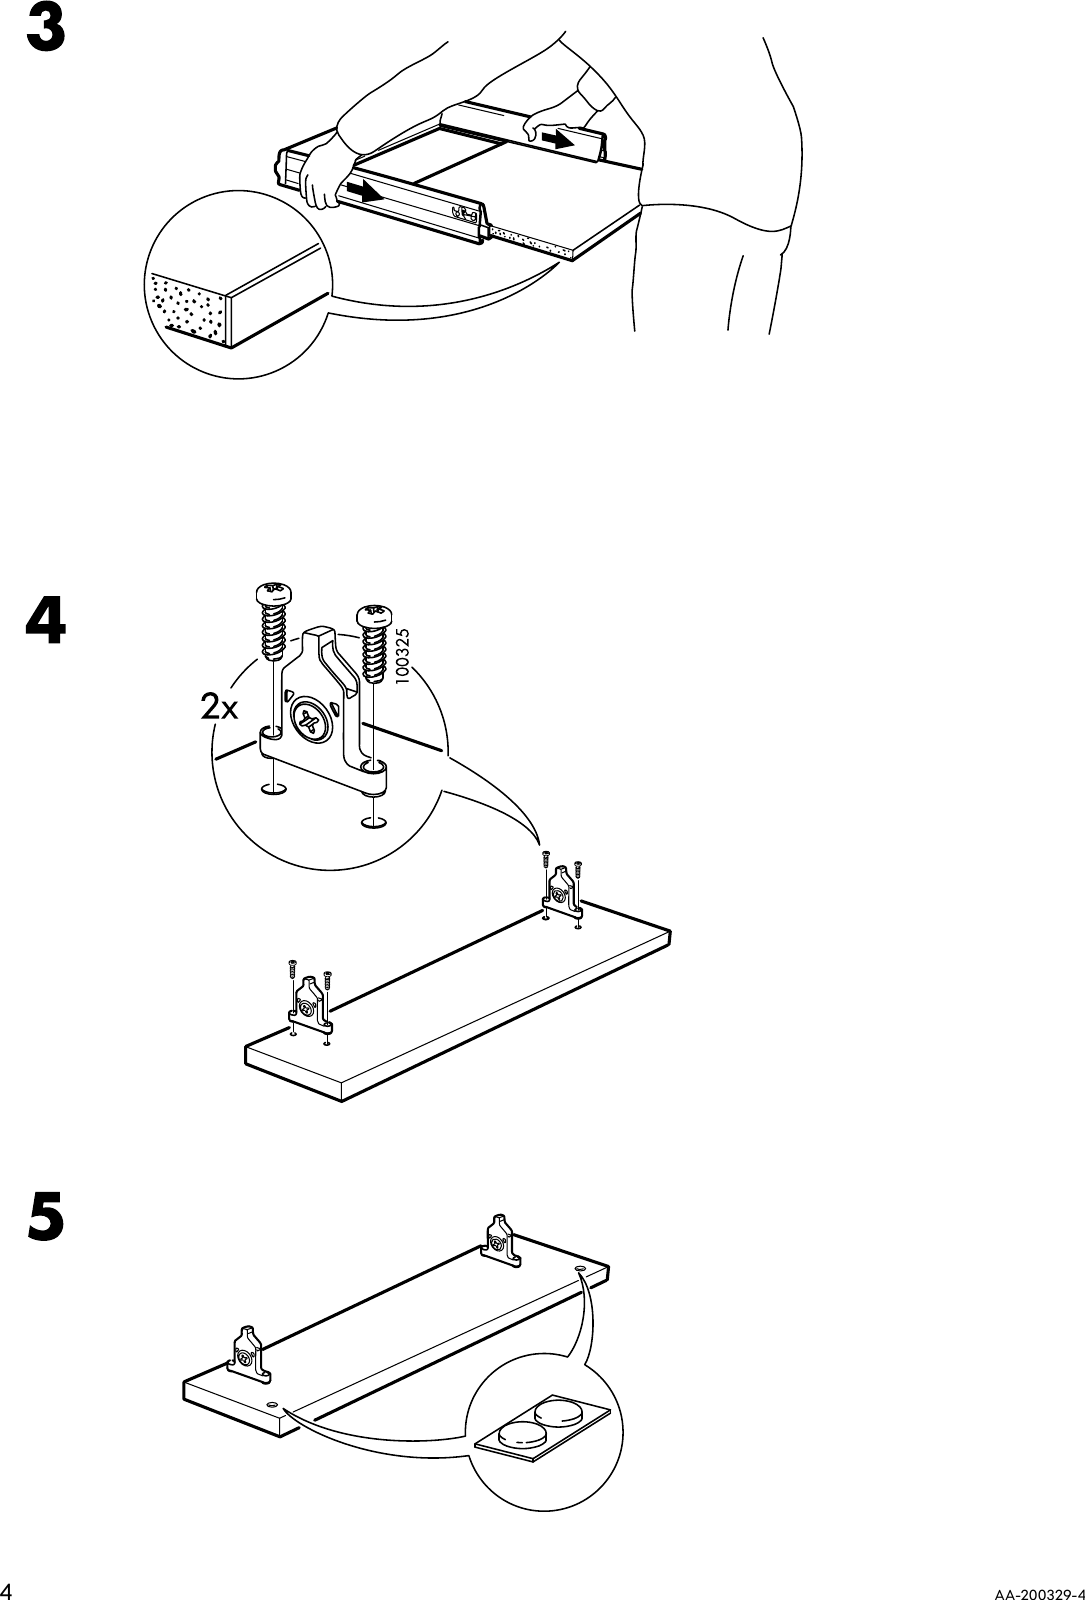 Page 4 of 8 - Ikea Ikea-Rationell-Full-Extending-Drawer-15-Assembly-Instruction